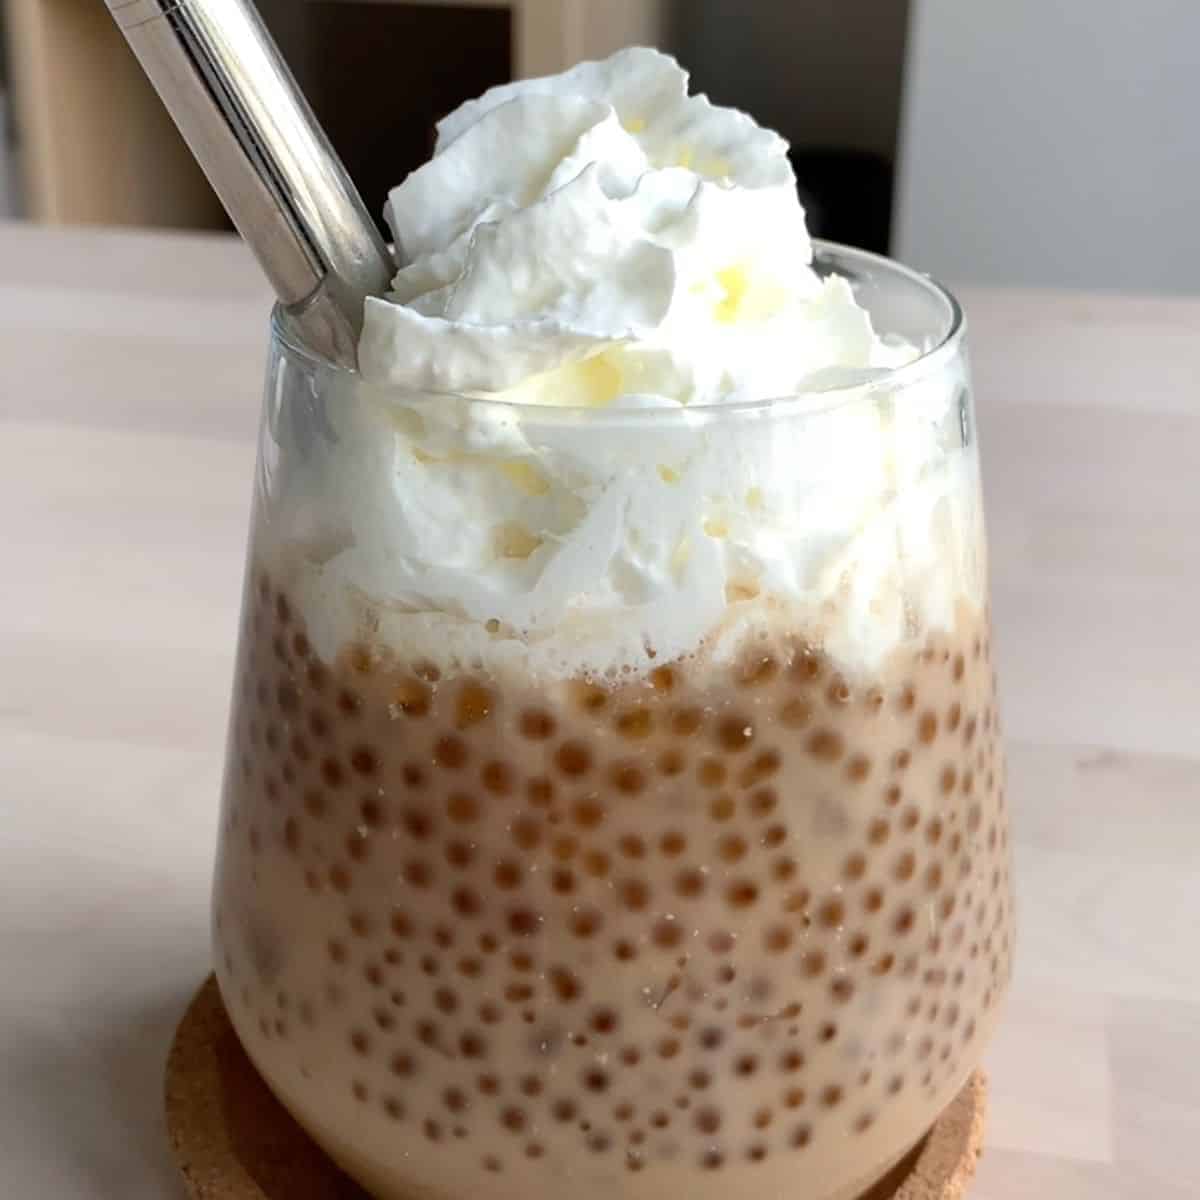 https://www.honestfoodtalks.com/wp-content/uploads/2022/06/Starbucks-Boba-with-coffee-popping-pearls-home-recipe.jpg